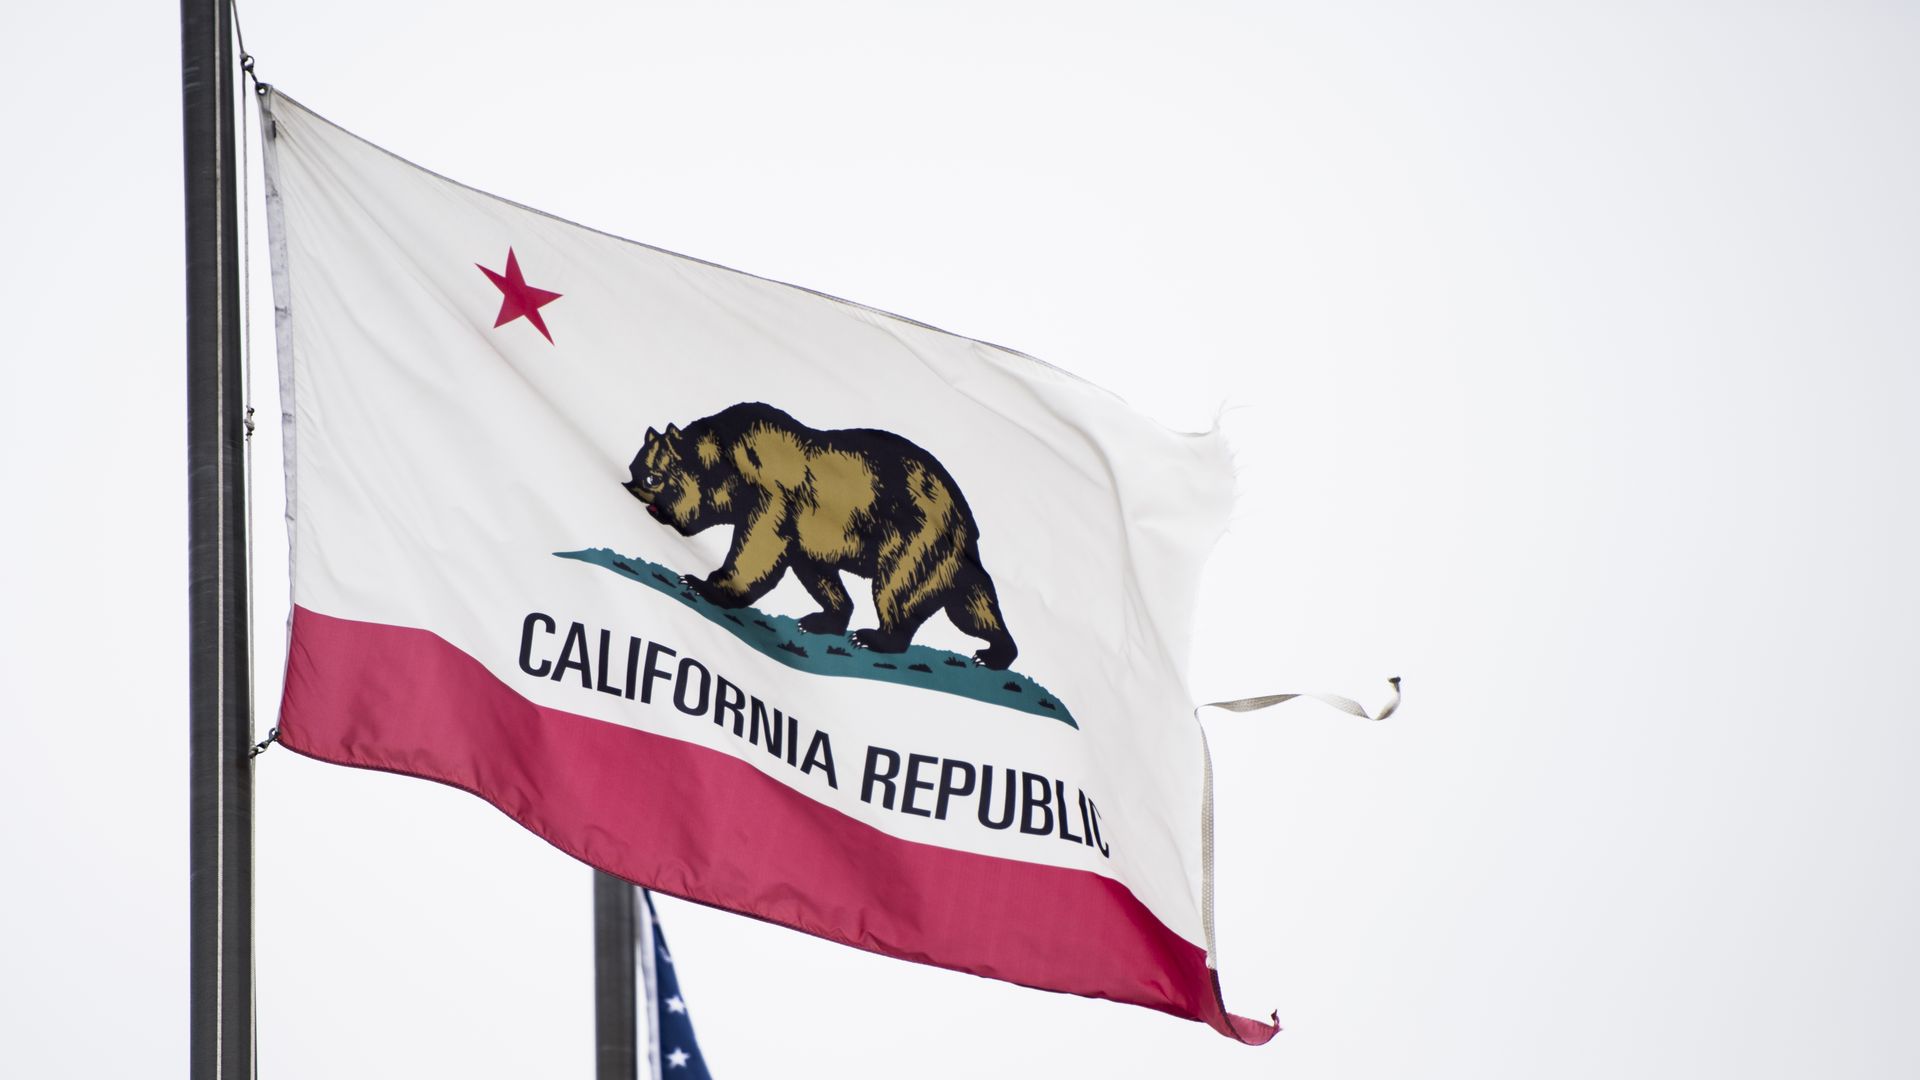 Photo of a California state flag flying on a pole next to the American flag